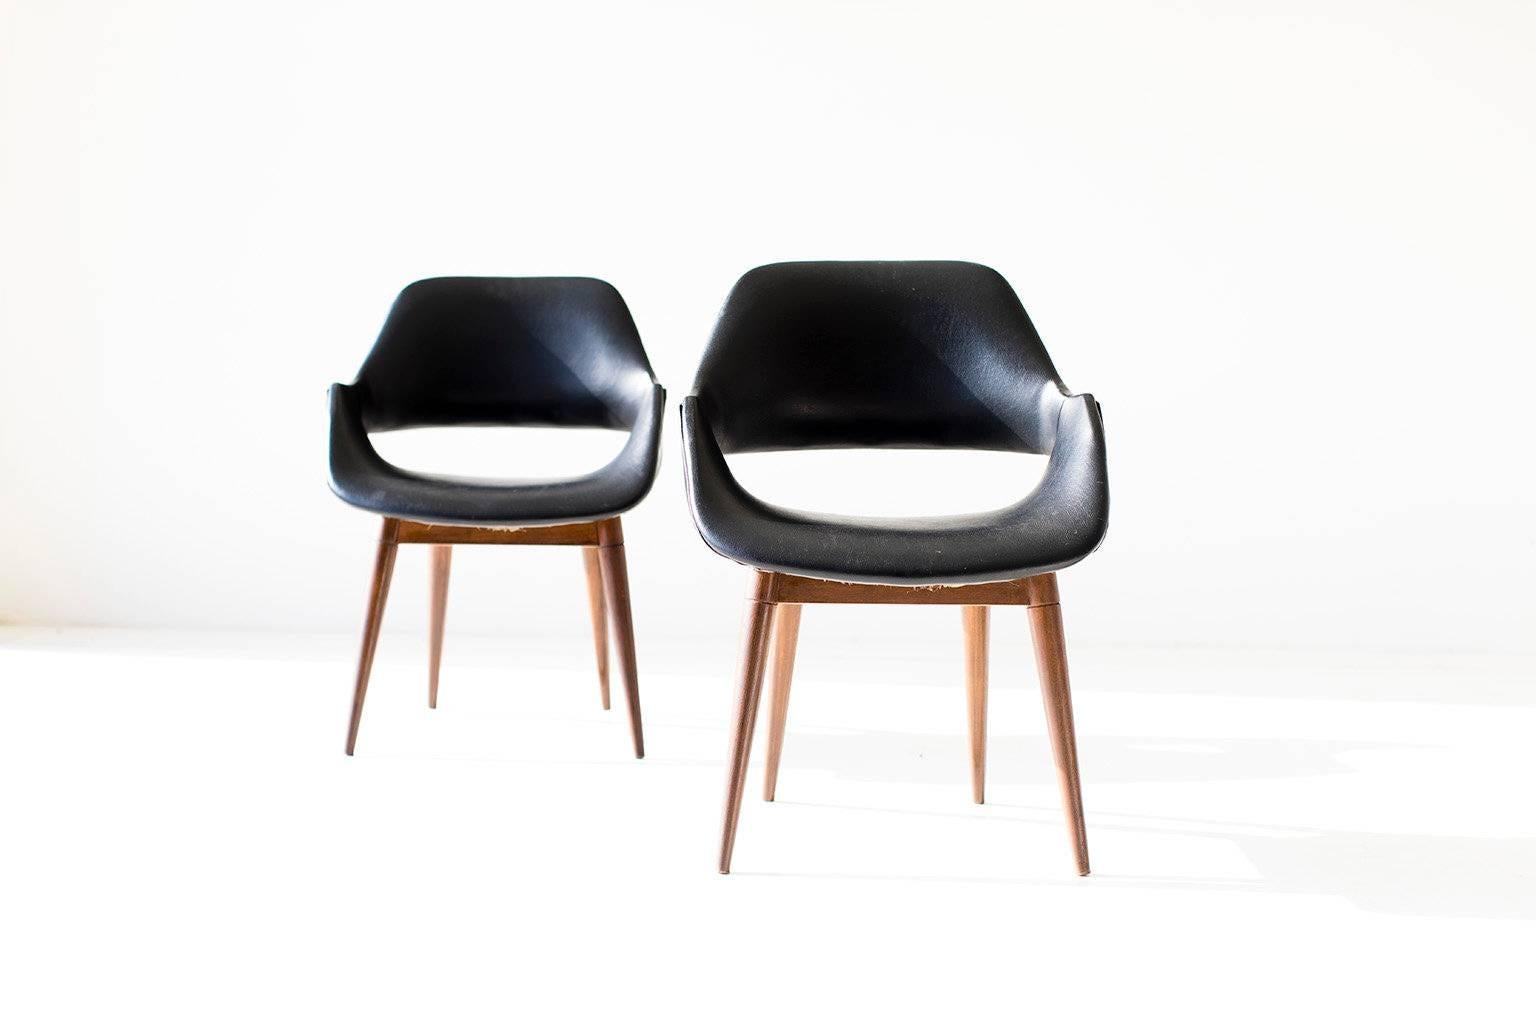 Designer: Arthur Umanoff. 

Manufacturer: Madison Furniture. 
Period or model: Mid-Century Modern. 
Specs: Vinyl, wood. 

Condition: 

These hard to find Arthur Umanoff chairs for Madison Furniture are in original vintage condition. The